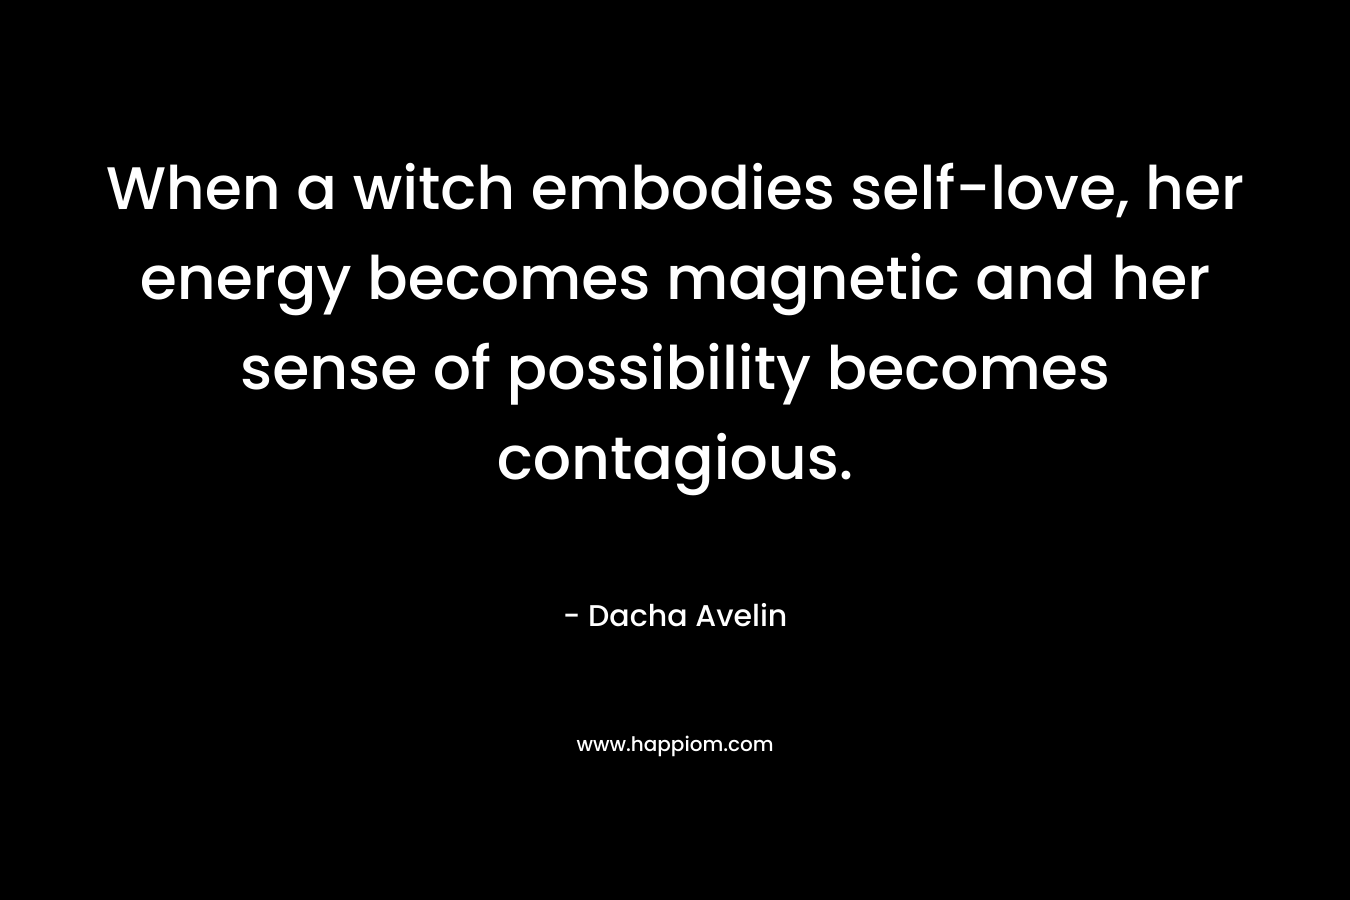 When a witch embodies self-love, her energy becomes magnetic and her sense of possibility becomes contagious.